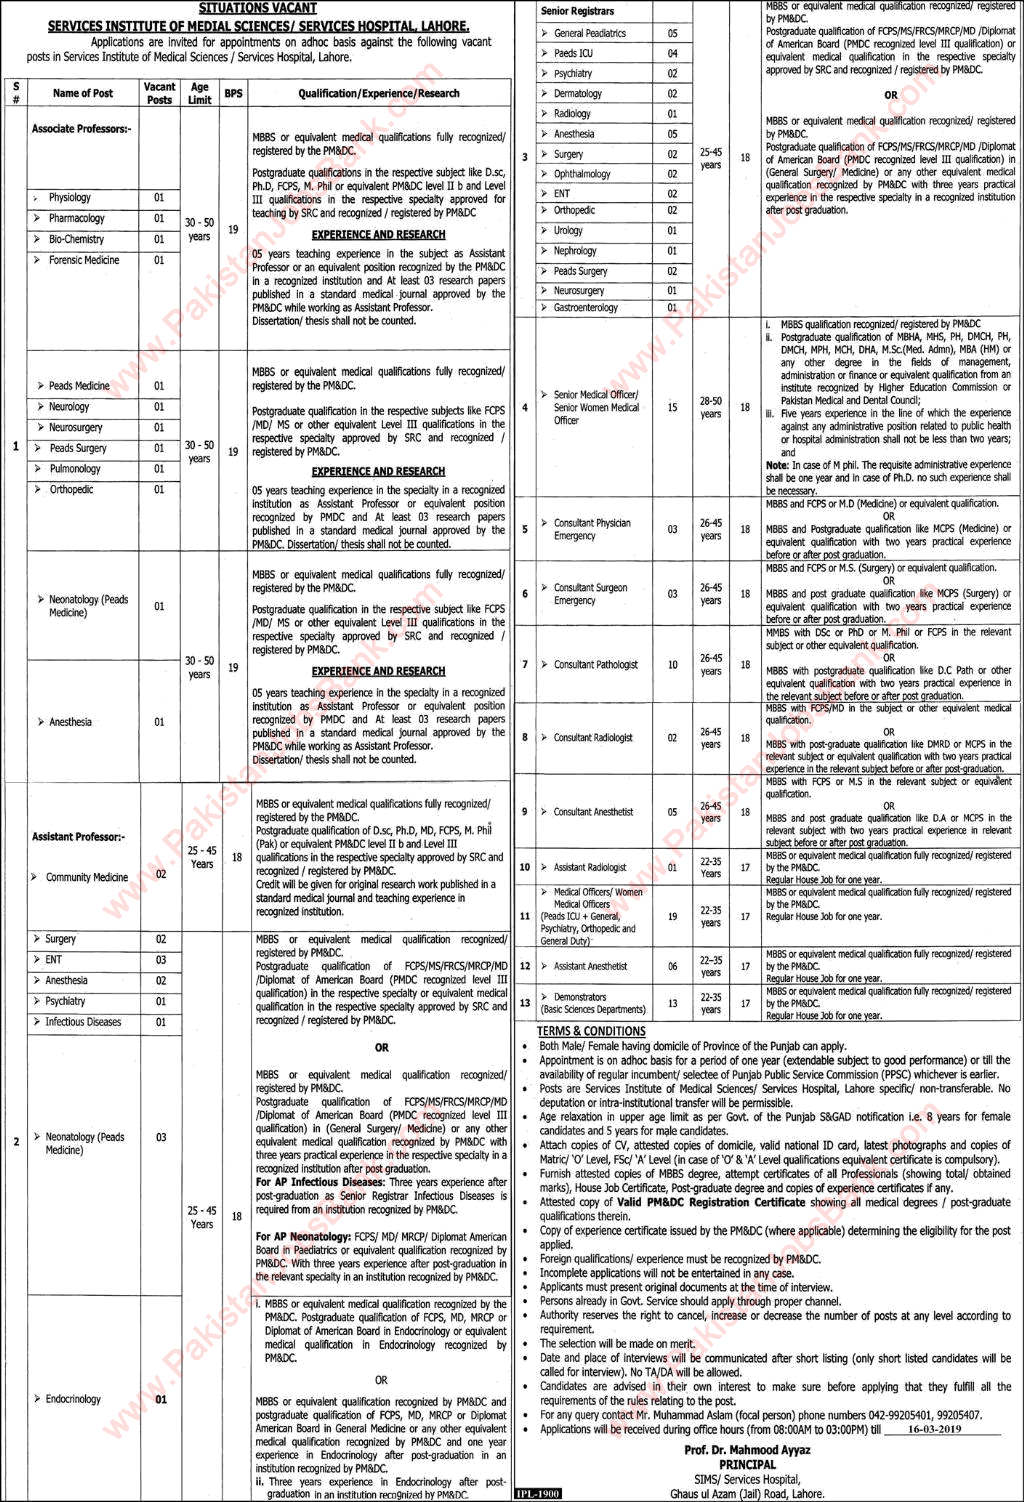 Services Hospital Lahore Jobs 2019 March Medical Officers, Senior Registrars & Others Latest